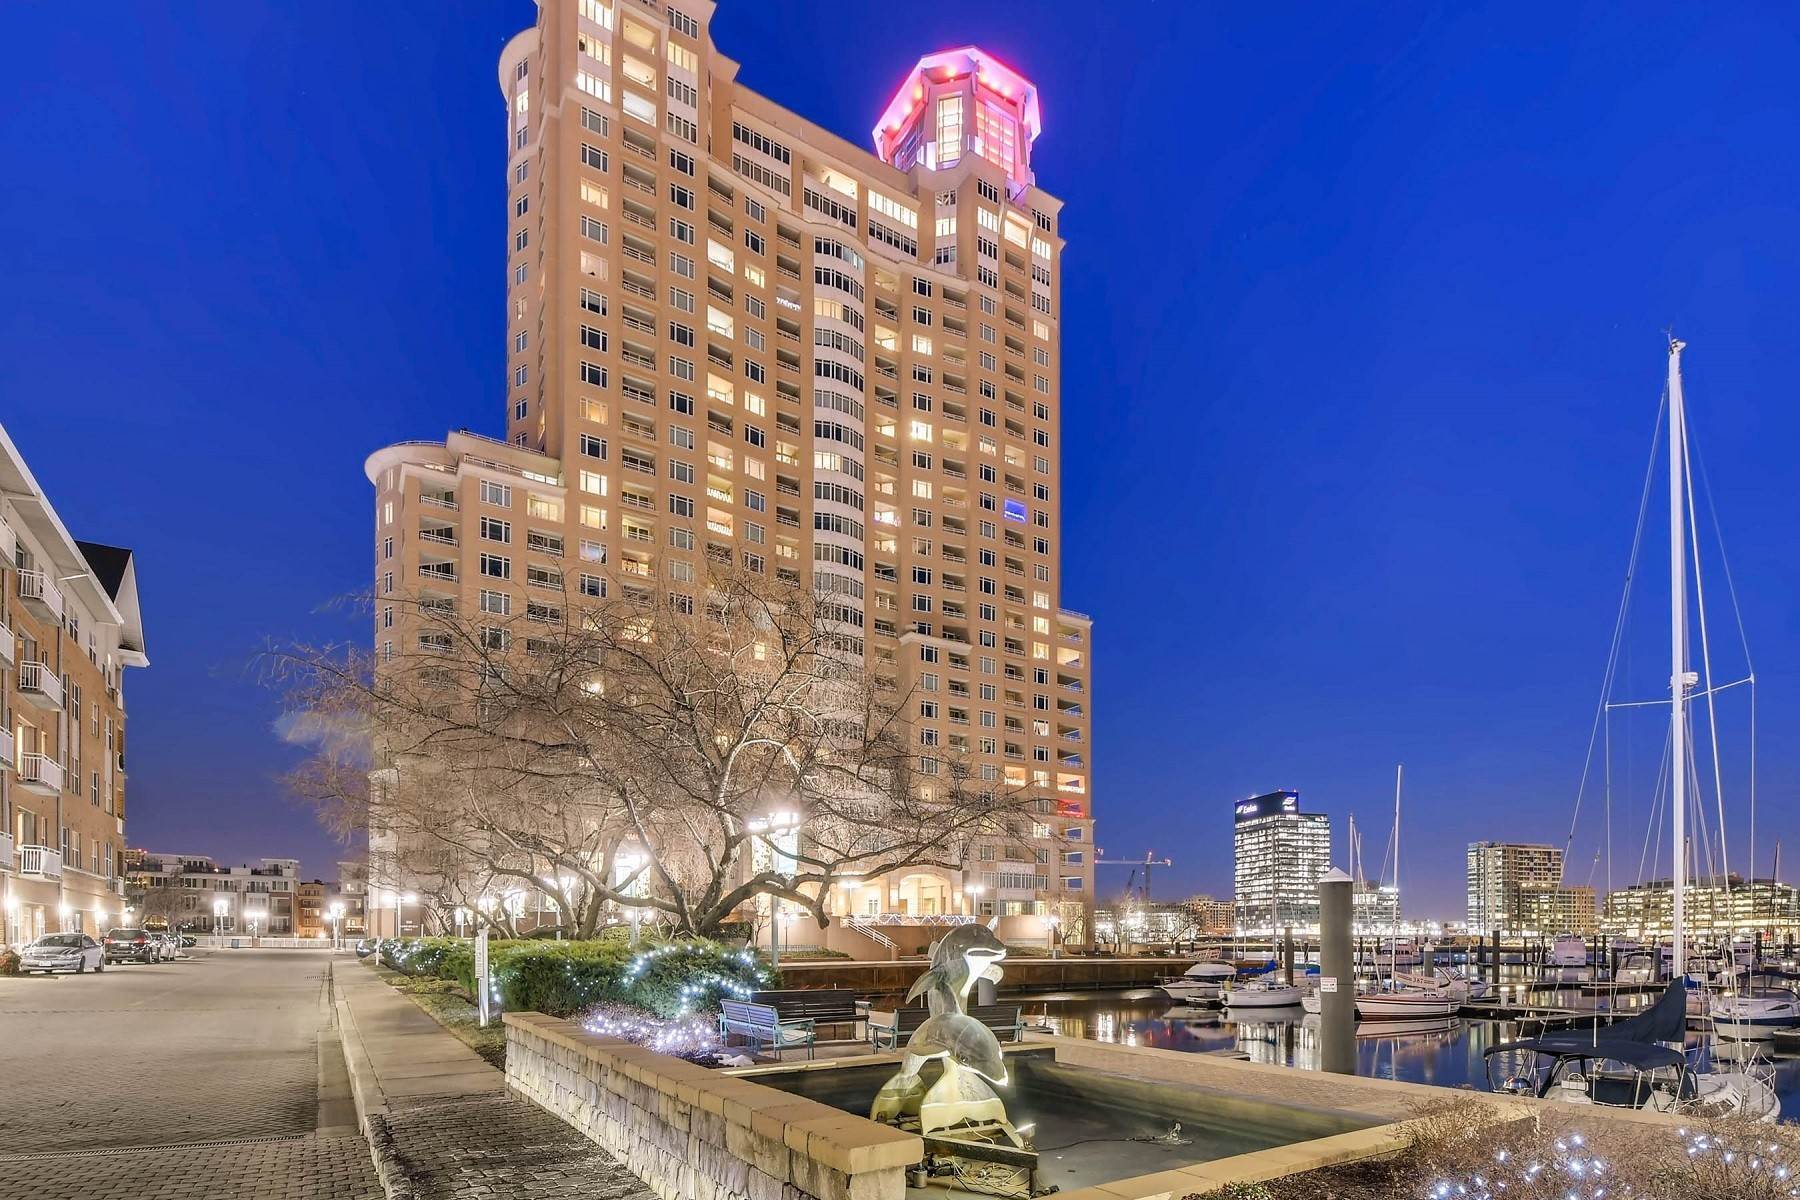 Property for Sale at Expansive and Captivating Harborview Condominium 100 Harborview Drive #1901 Baltimore, Maryland 21230 United States